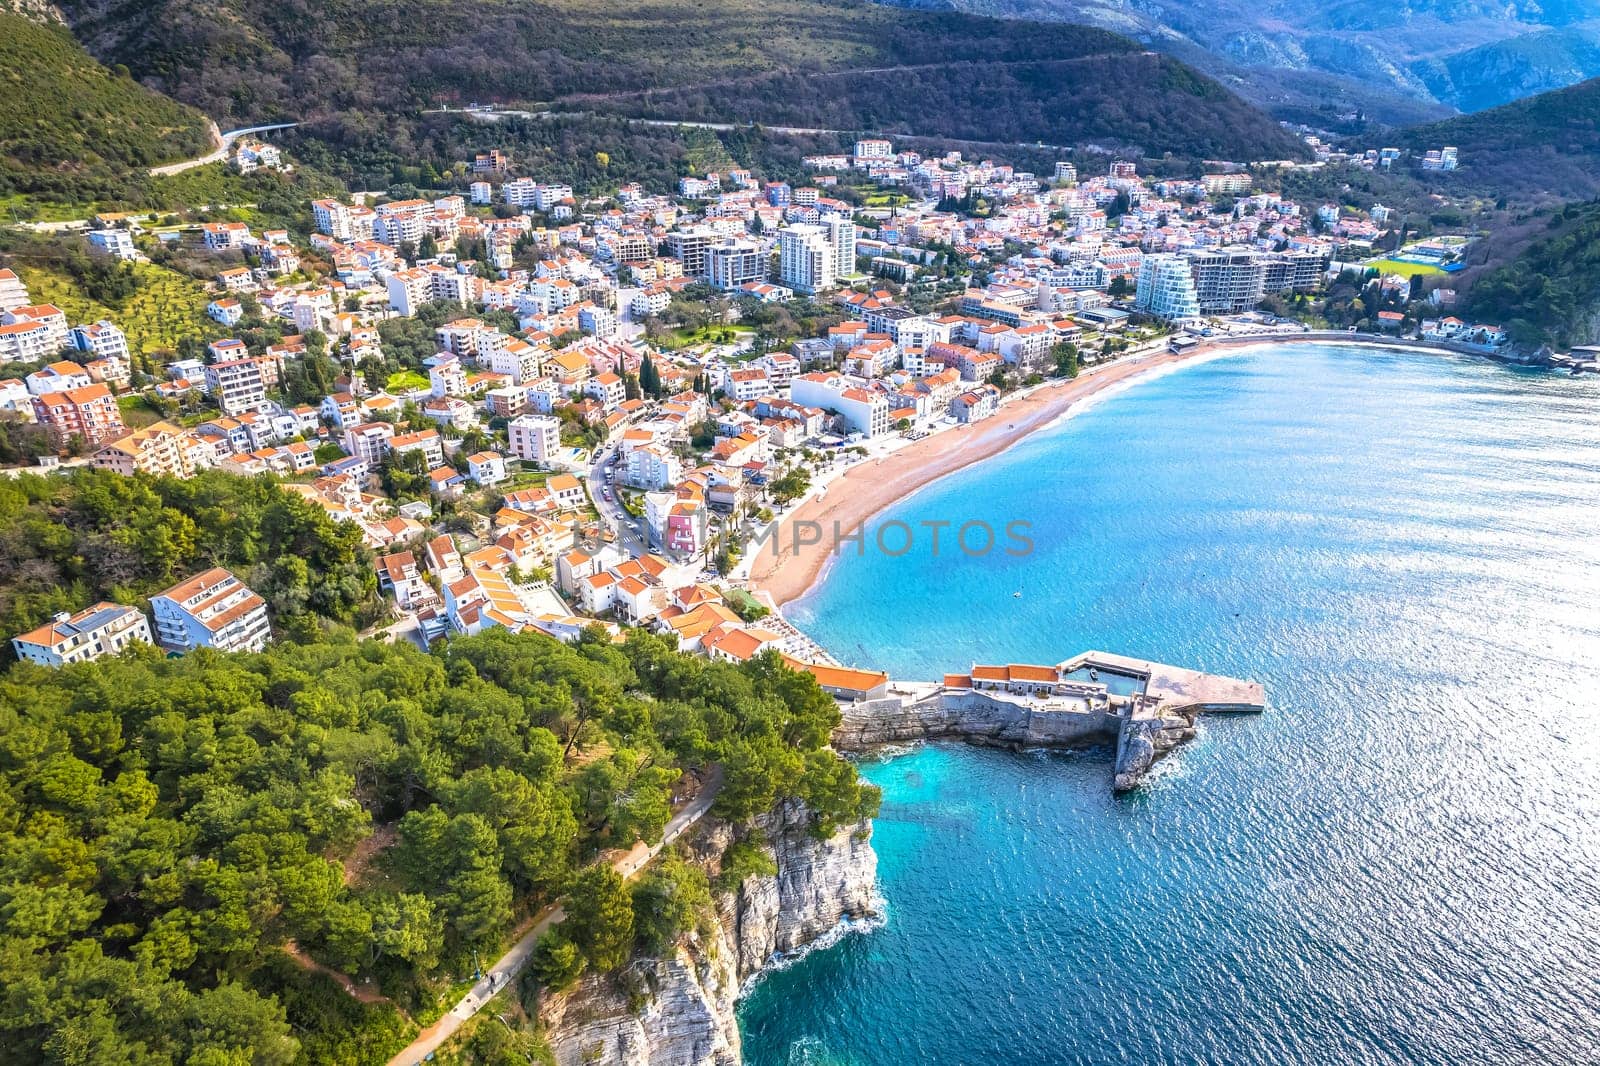 Town of Petrovac beach and coastline aerial view, archipelago of Montenegro